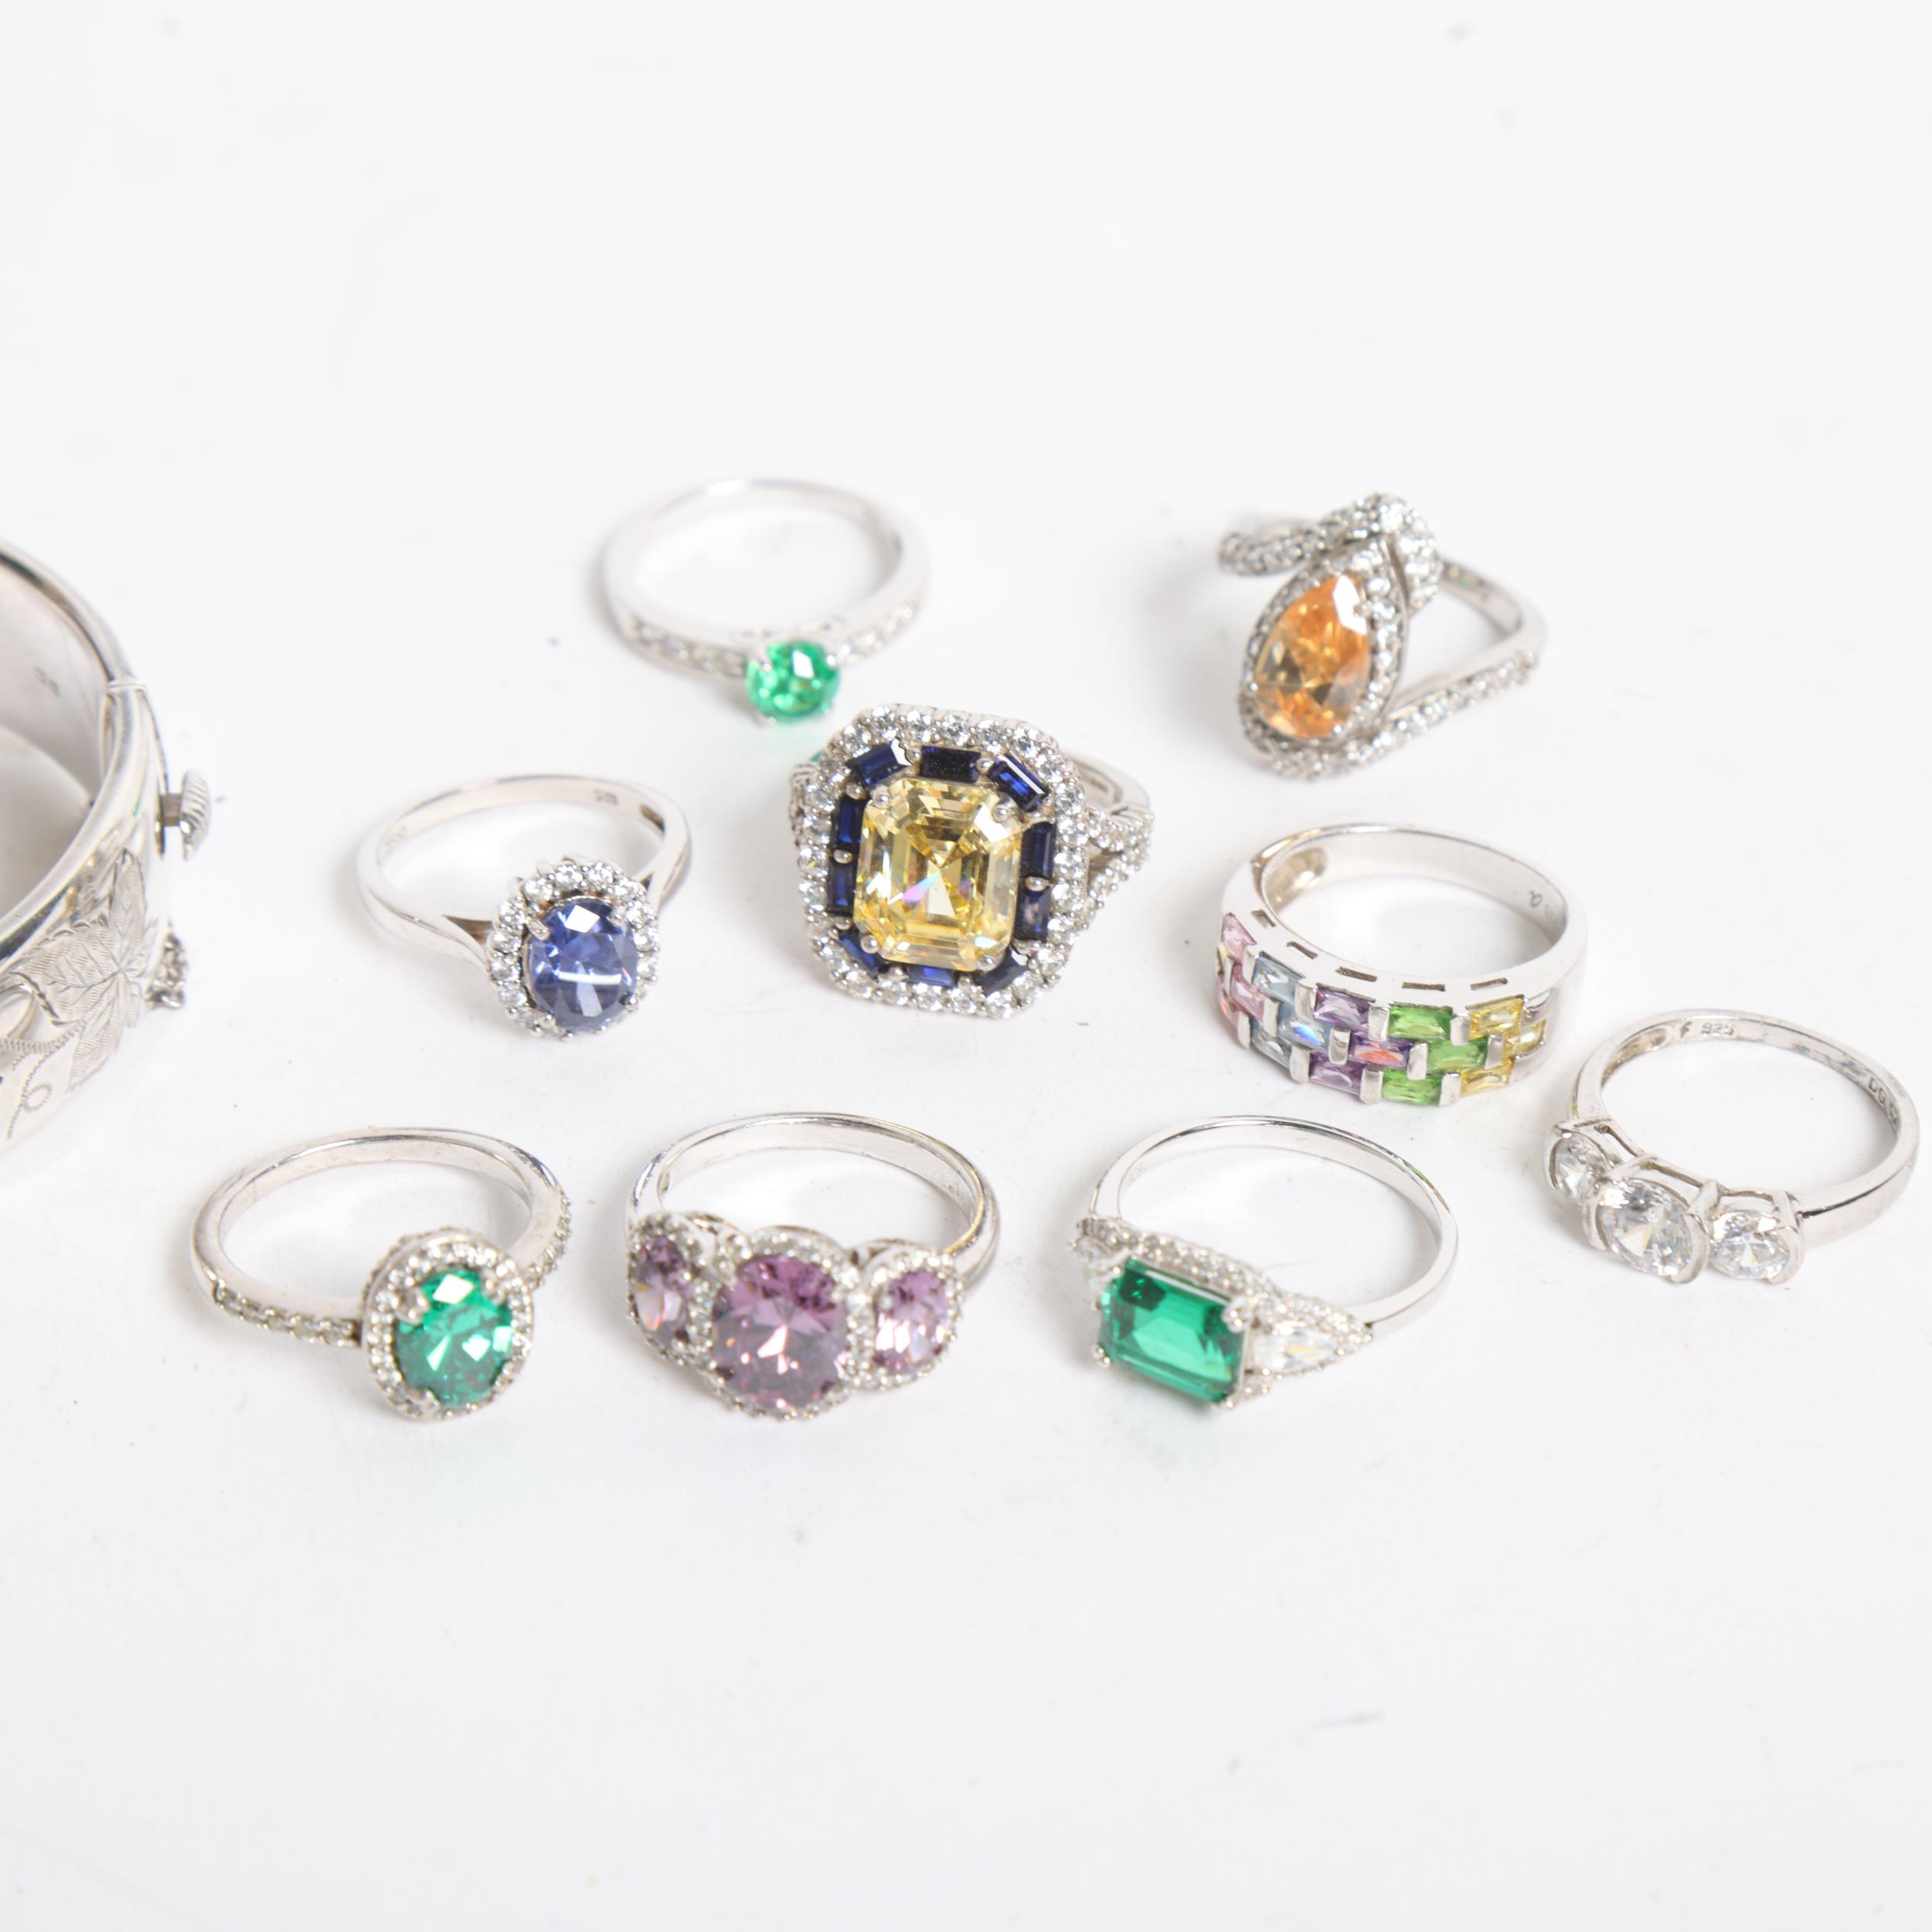 9 various stone set silver dress rings, and an engraved silver hinged bangle - Image 2 of 2